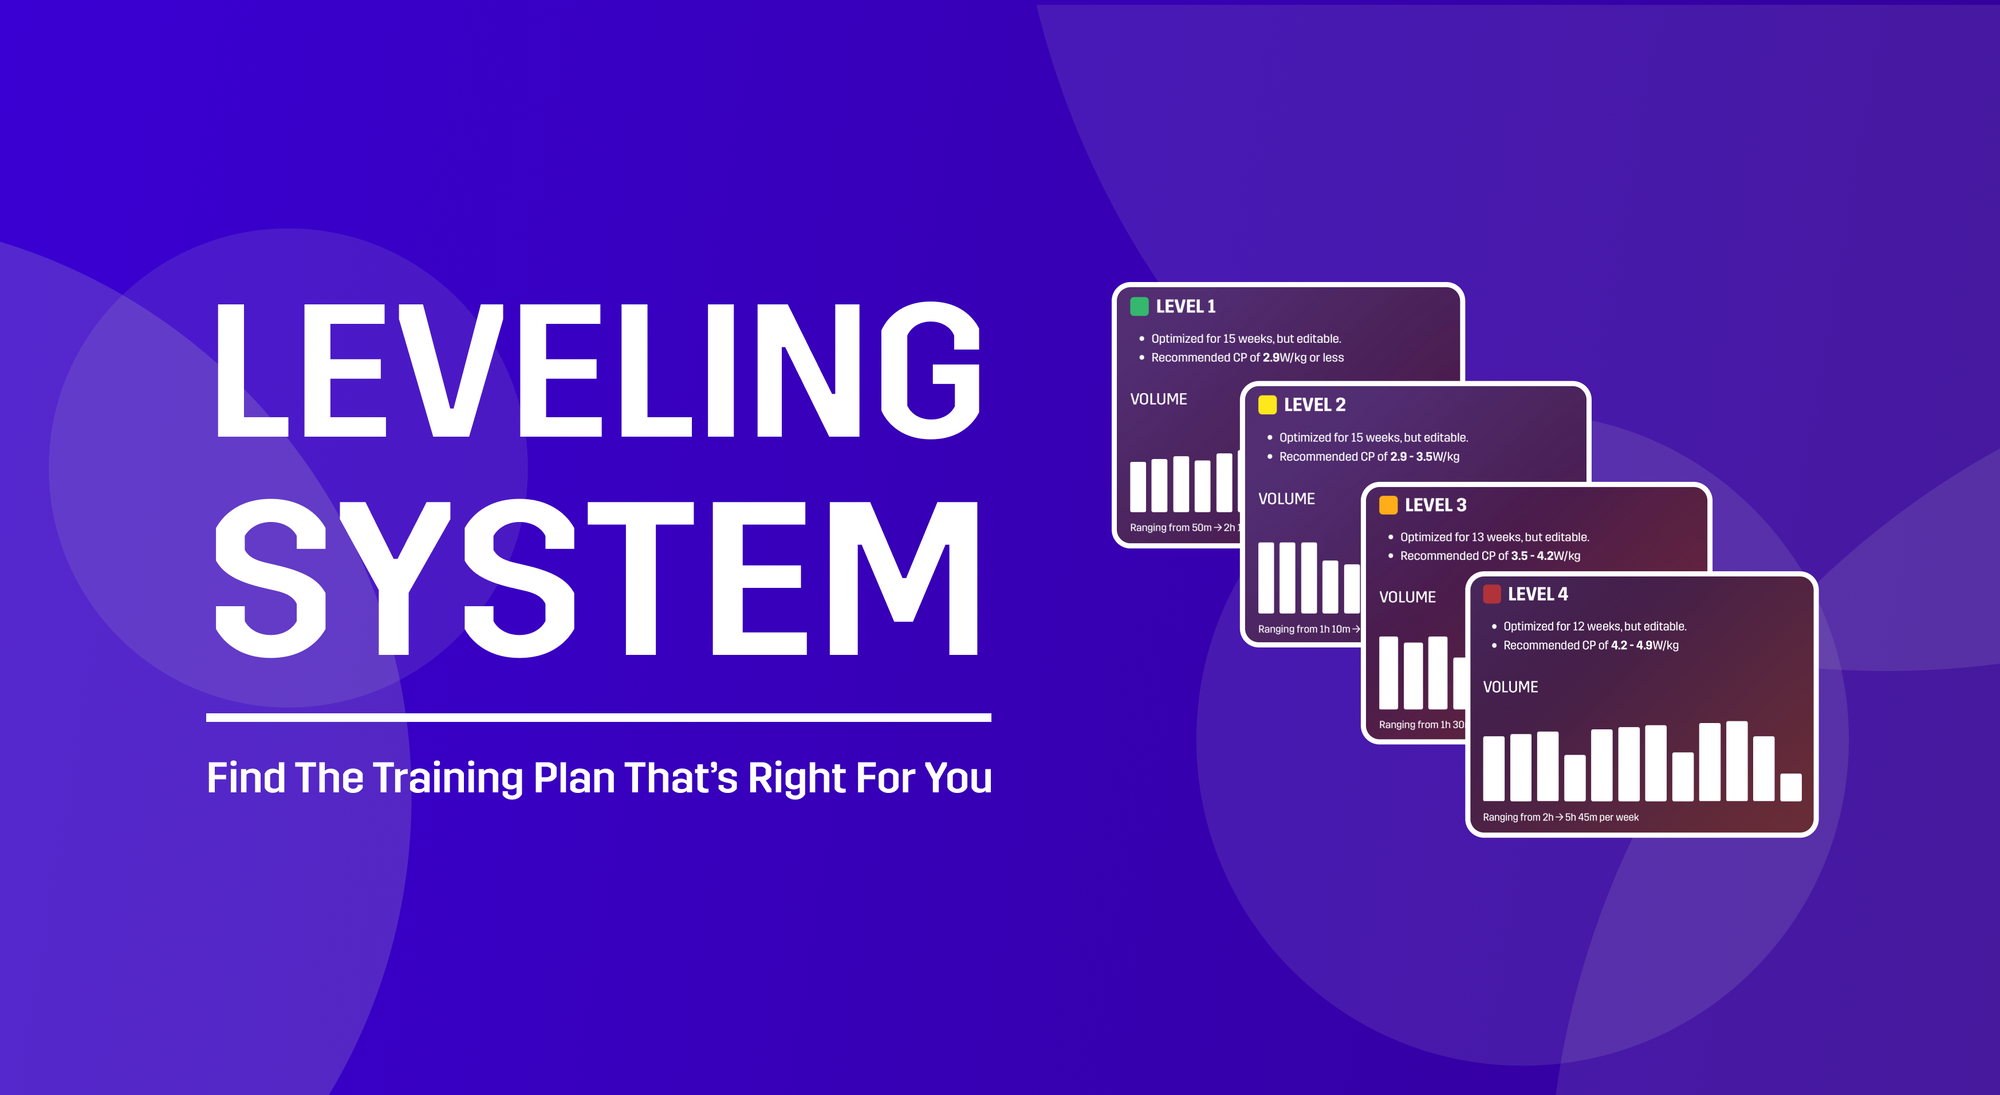 Find the Training Plan That’s Right for You With the New Leveling System